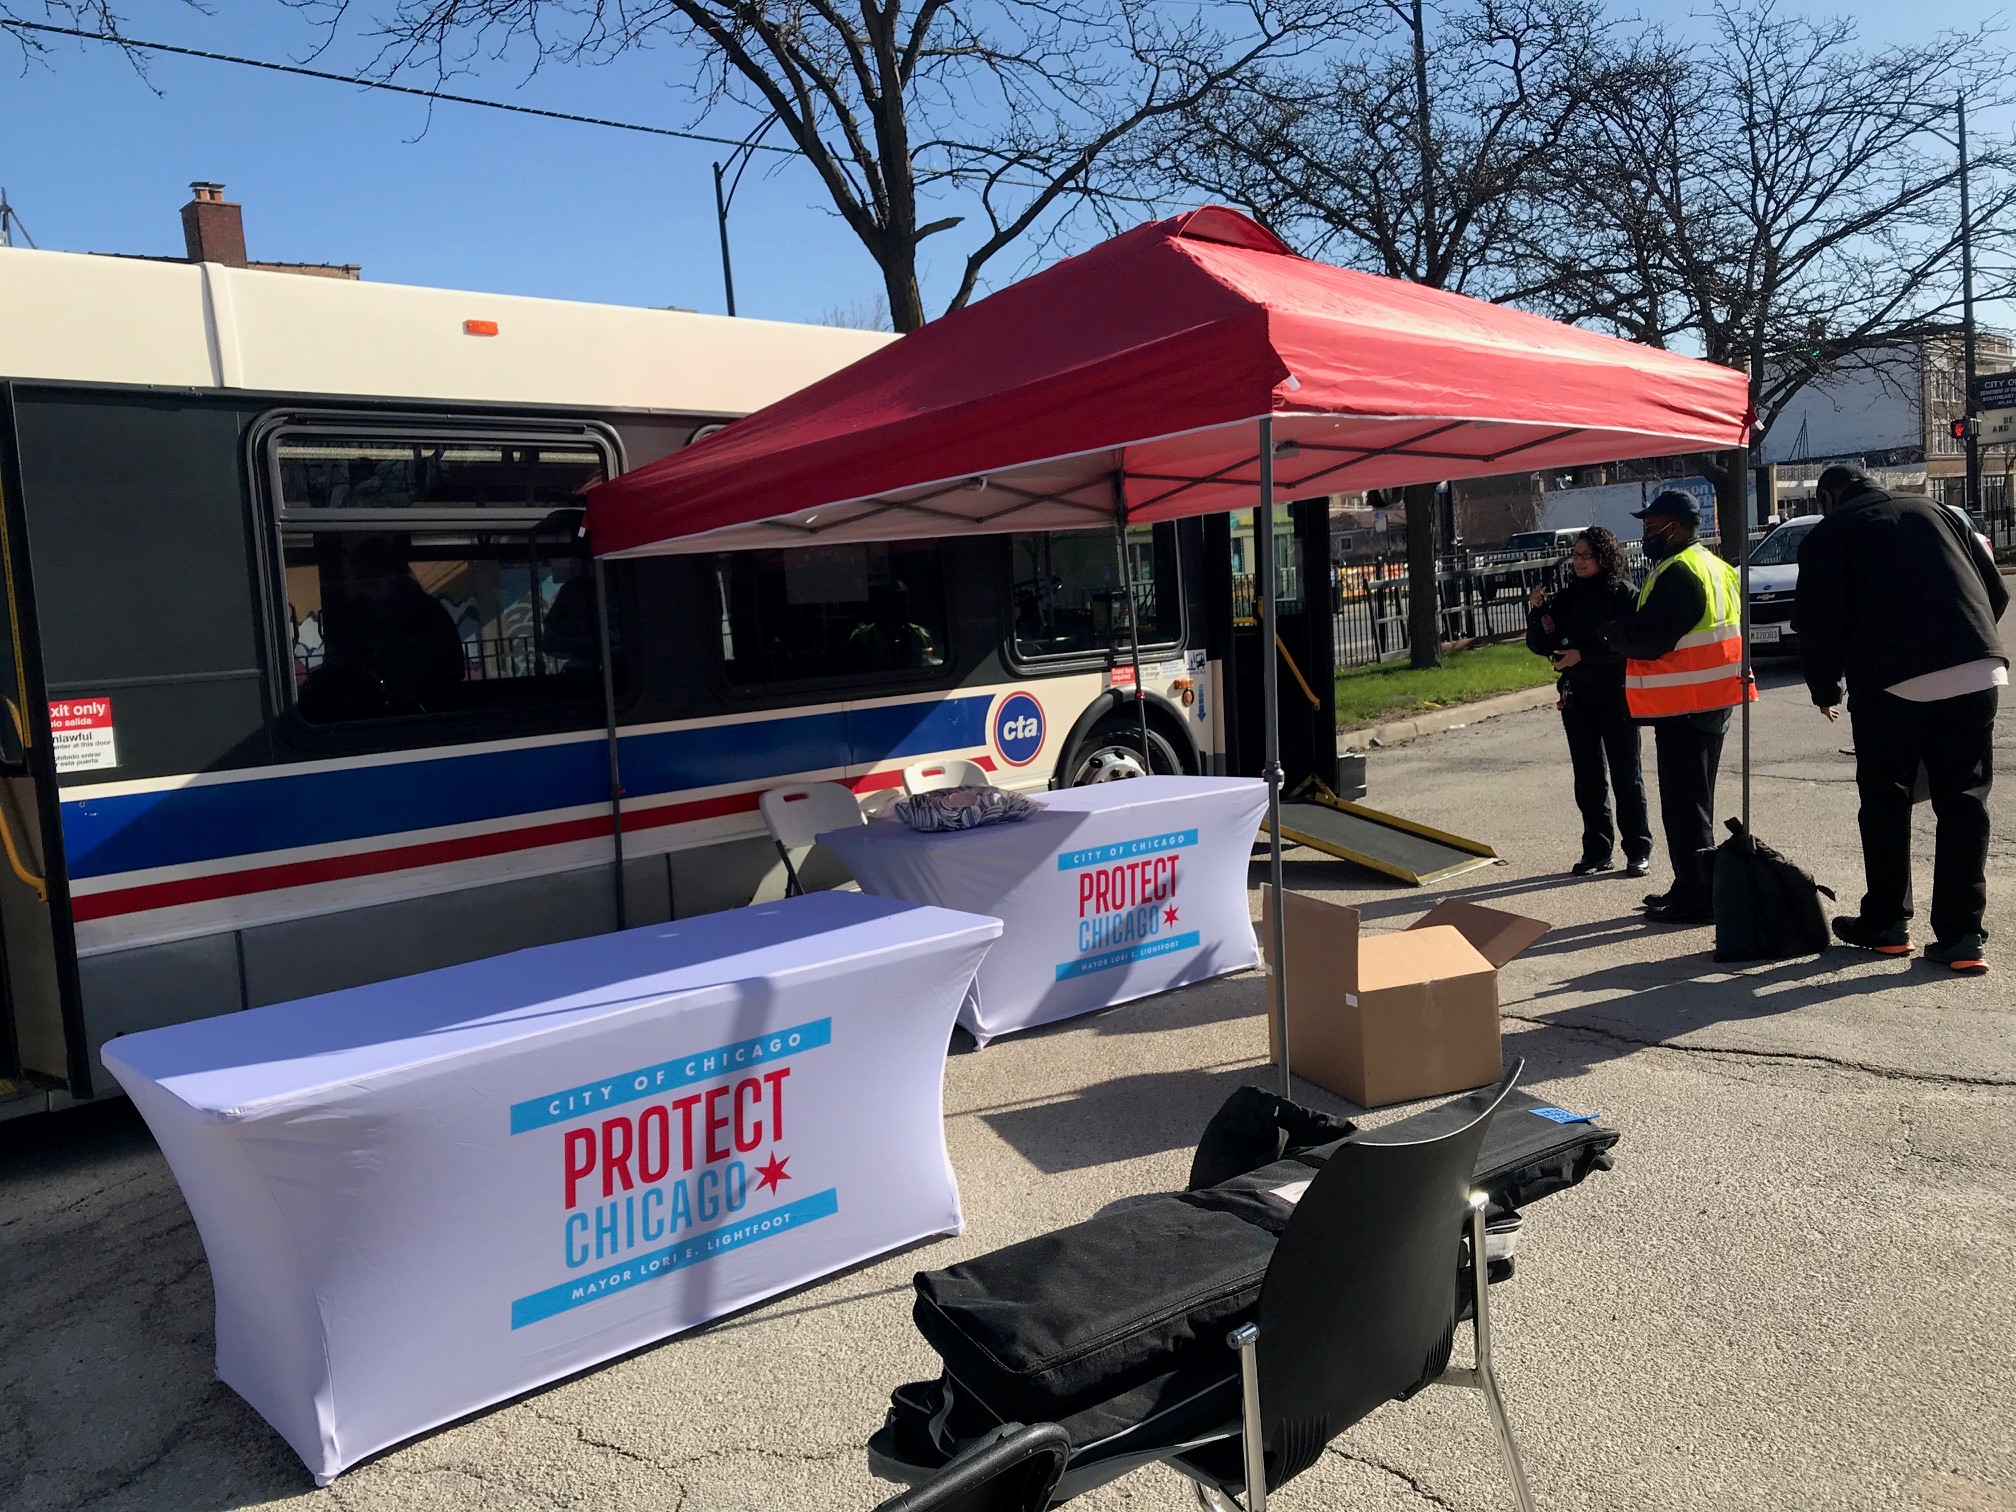 CDPH Launches New Pilot Program, Protect Chicago Vaccination Bus